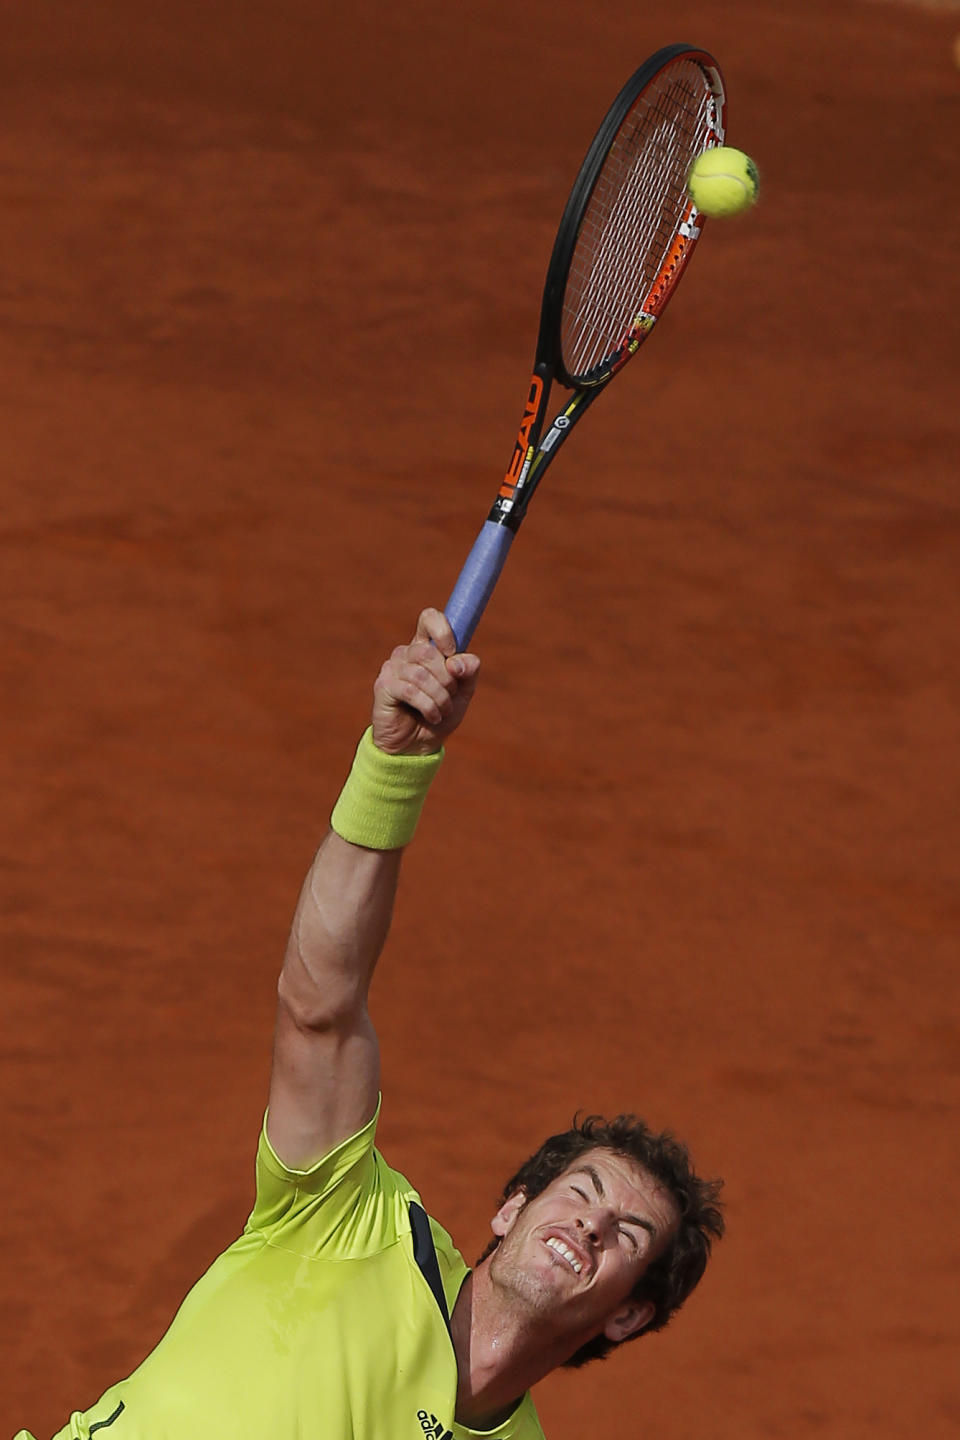 Andy Murray from Britain serves during a Madrid Open tennis tournament match against Santiago Giraldo from Colombia in Madrid, Spain, Thursday, May 8, 2014. (AP Photo/Andres Kudacki)